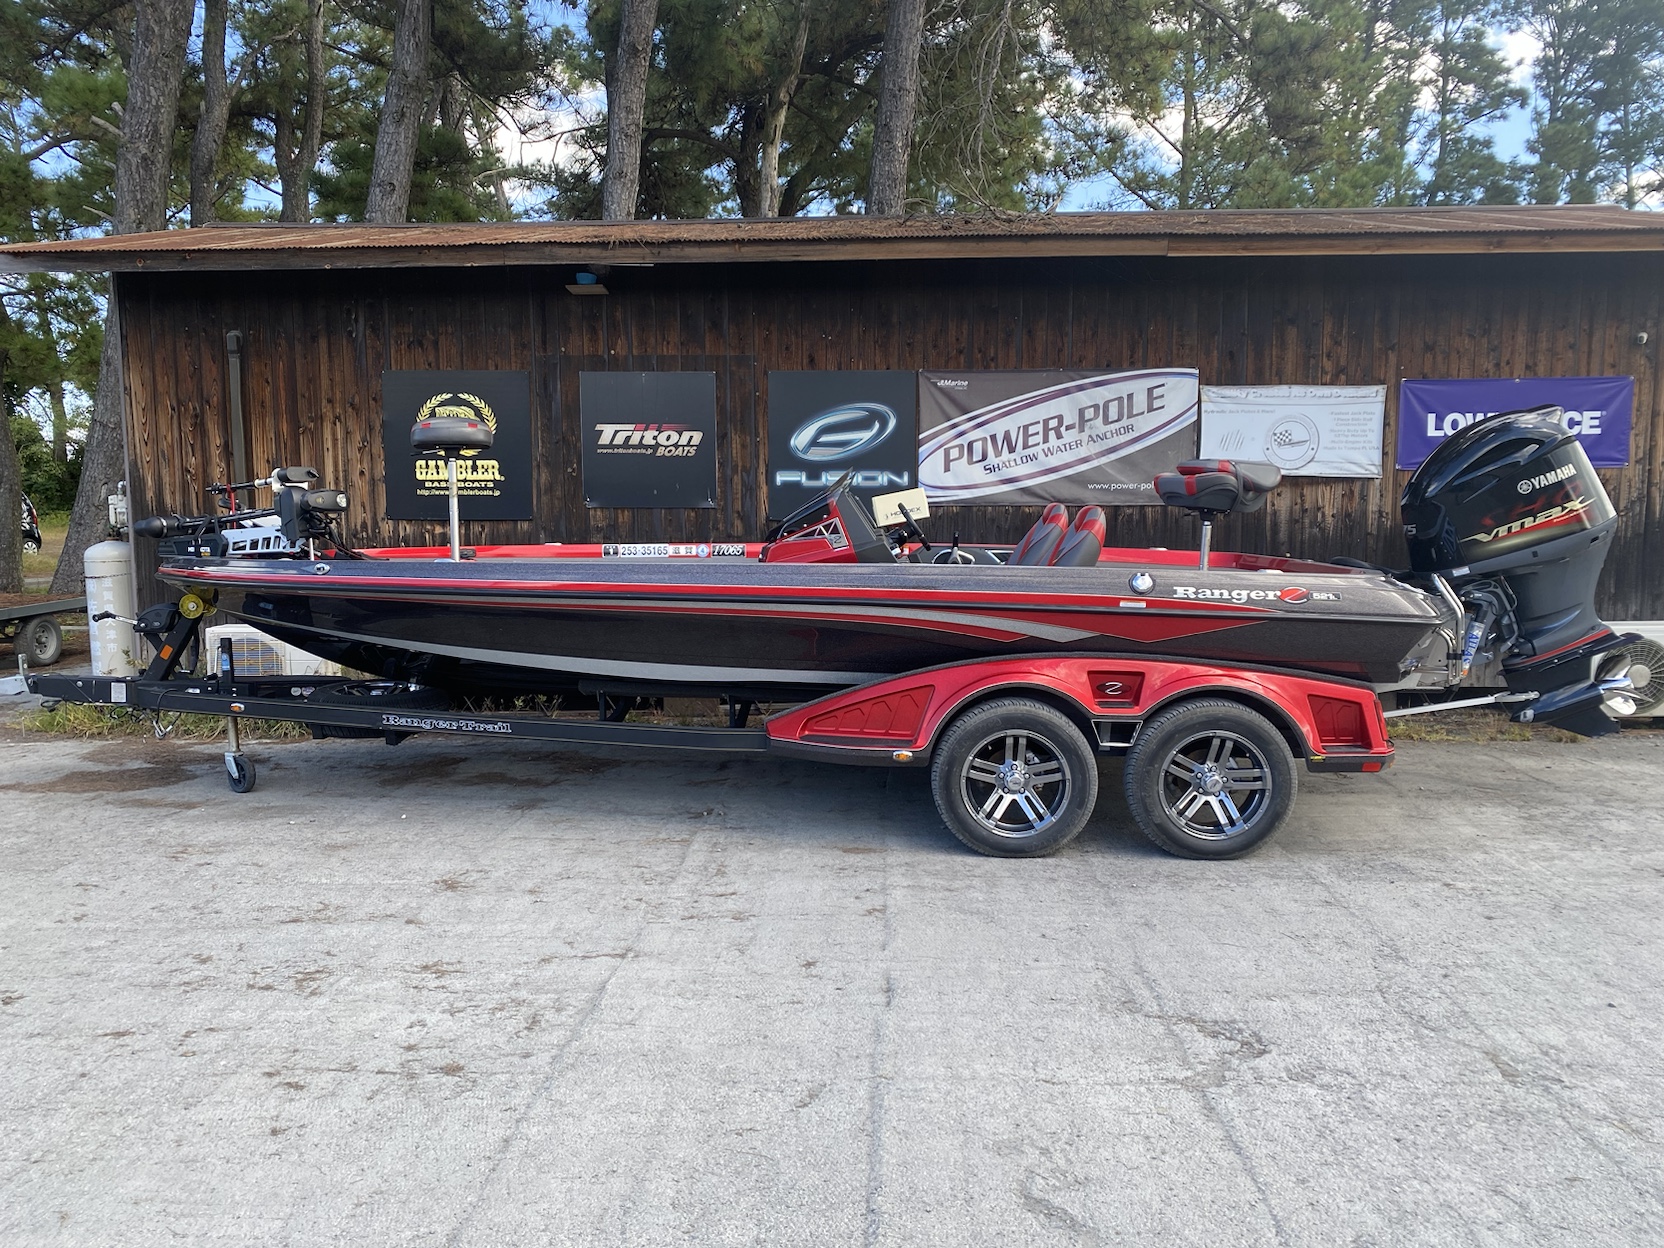 SOLD OUT 2023年末まで保管料無料’19 Ranger Boats  Z521L with SHO275